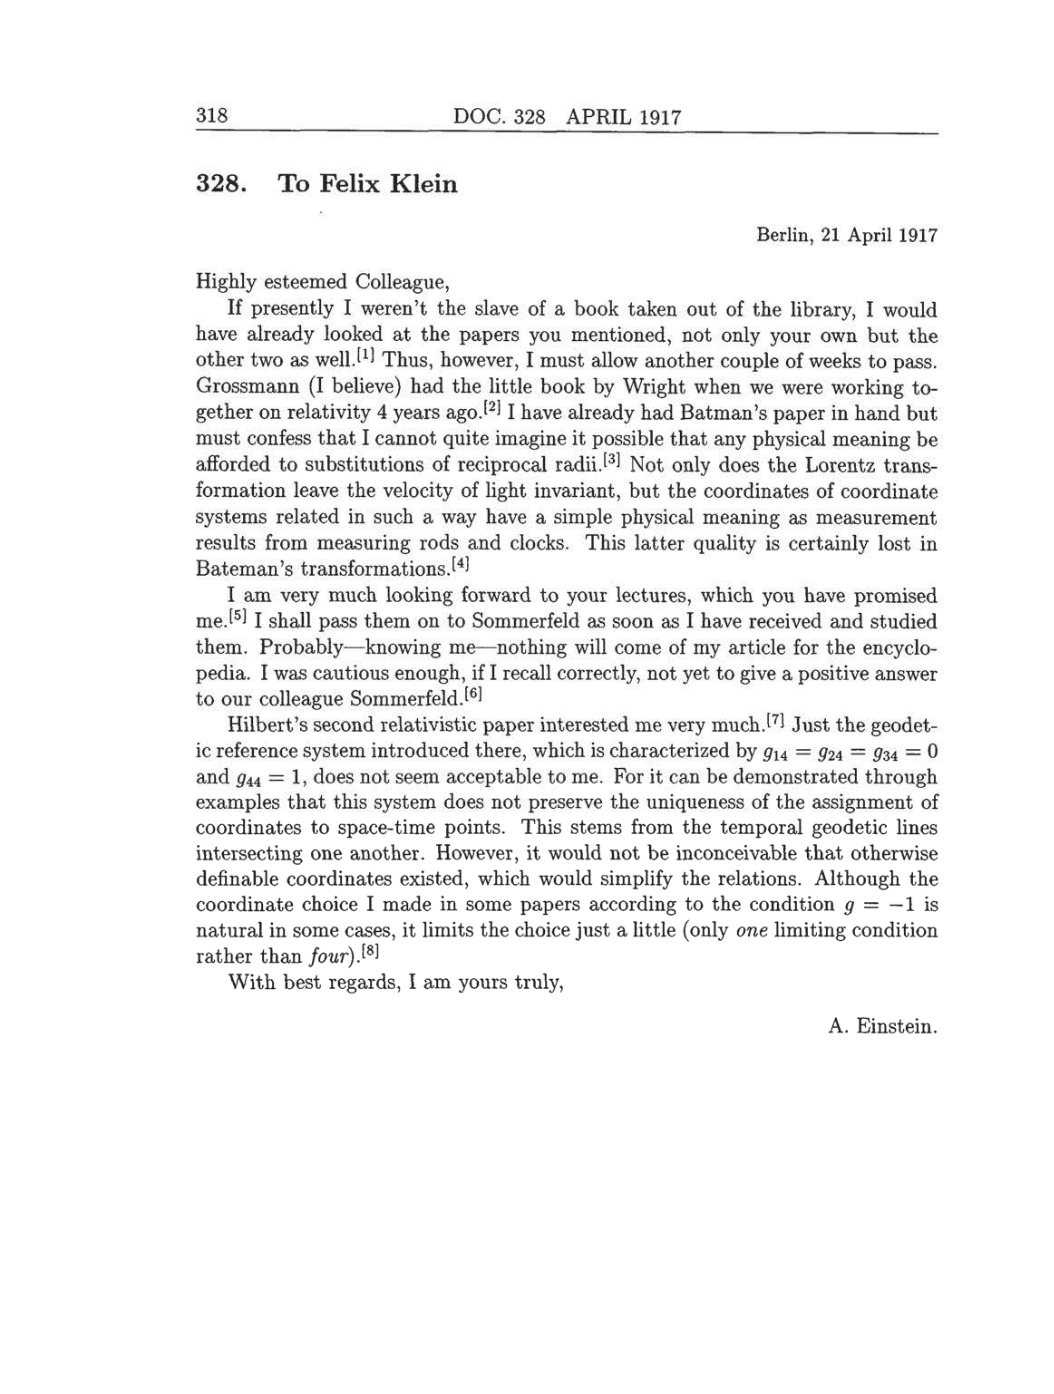 Volume 8: The Berlin Years: Correspondence, 1914-1918 (English translation supplement) page 318